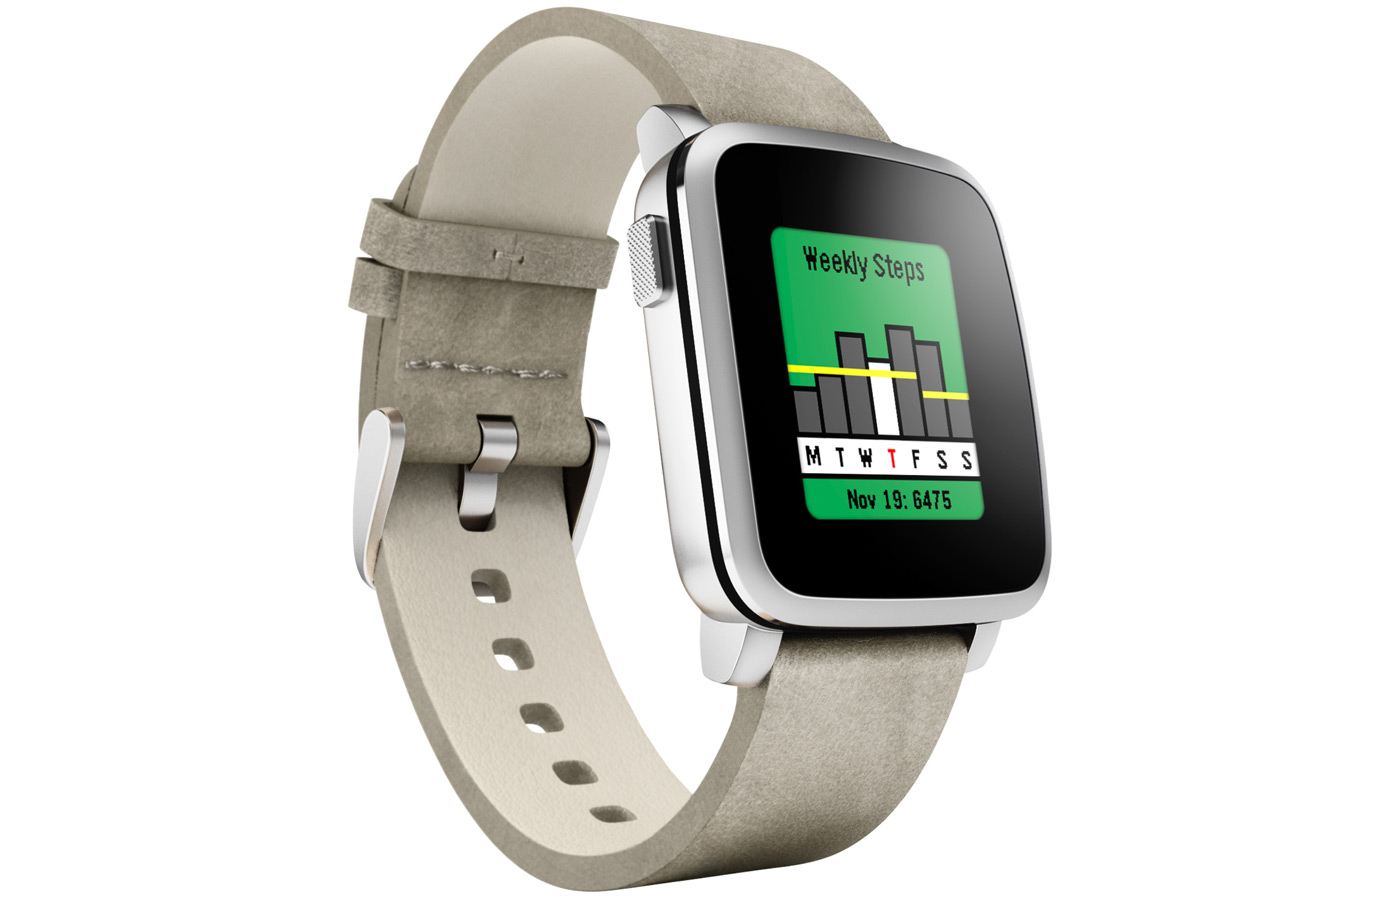 Pebble smartwatches get a built-in fitness tracking app